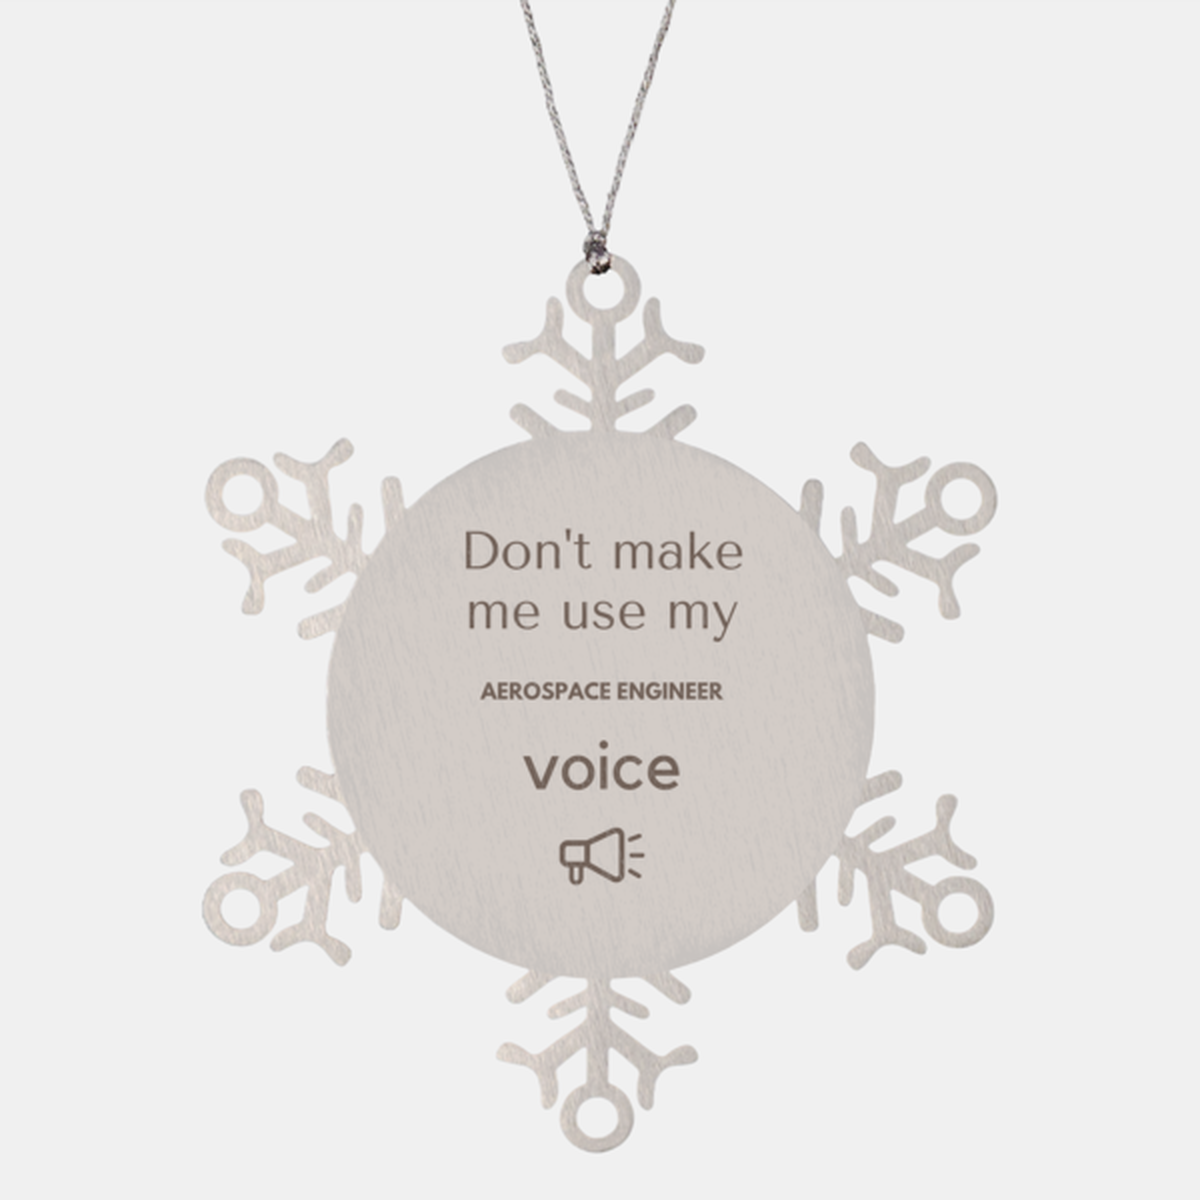 Don't make me use my Aerospace Engineer voice, Sarcasm Aerospace Engineer Ornament Gifts, Christmas Aerospace Engineer Snowflake Ornament Unique Gifts For Aerospace Engineer Coworkers, Men, Women, Colleague, Friends